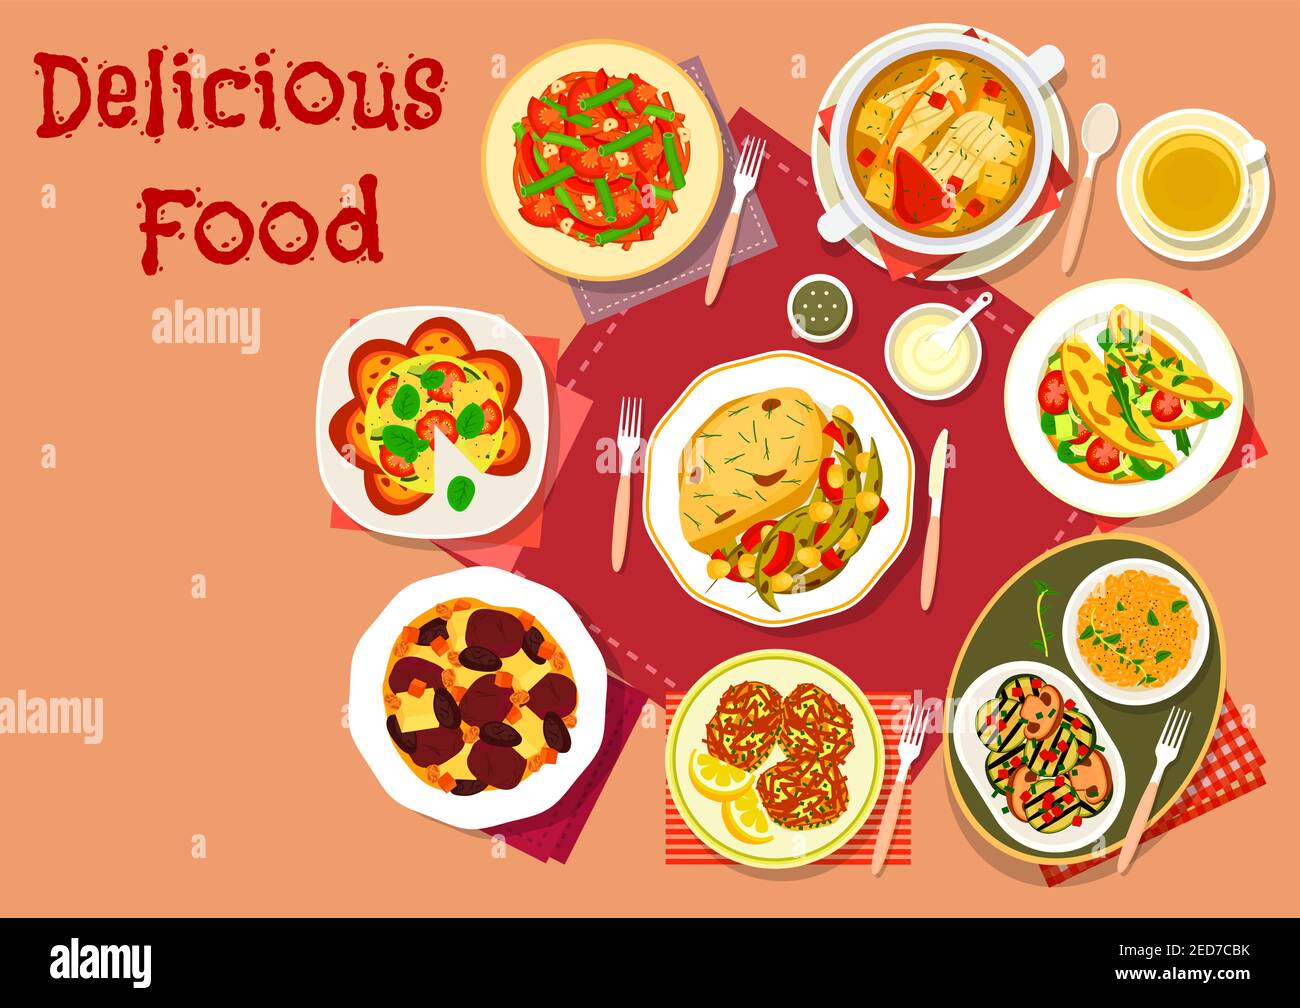 Popular dishes for lunch icon of beef stew with prune, zucchini egg casserole with bread, tomato, turkey with green bean, vegetable snack, fish soup, Stock Vector